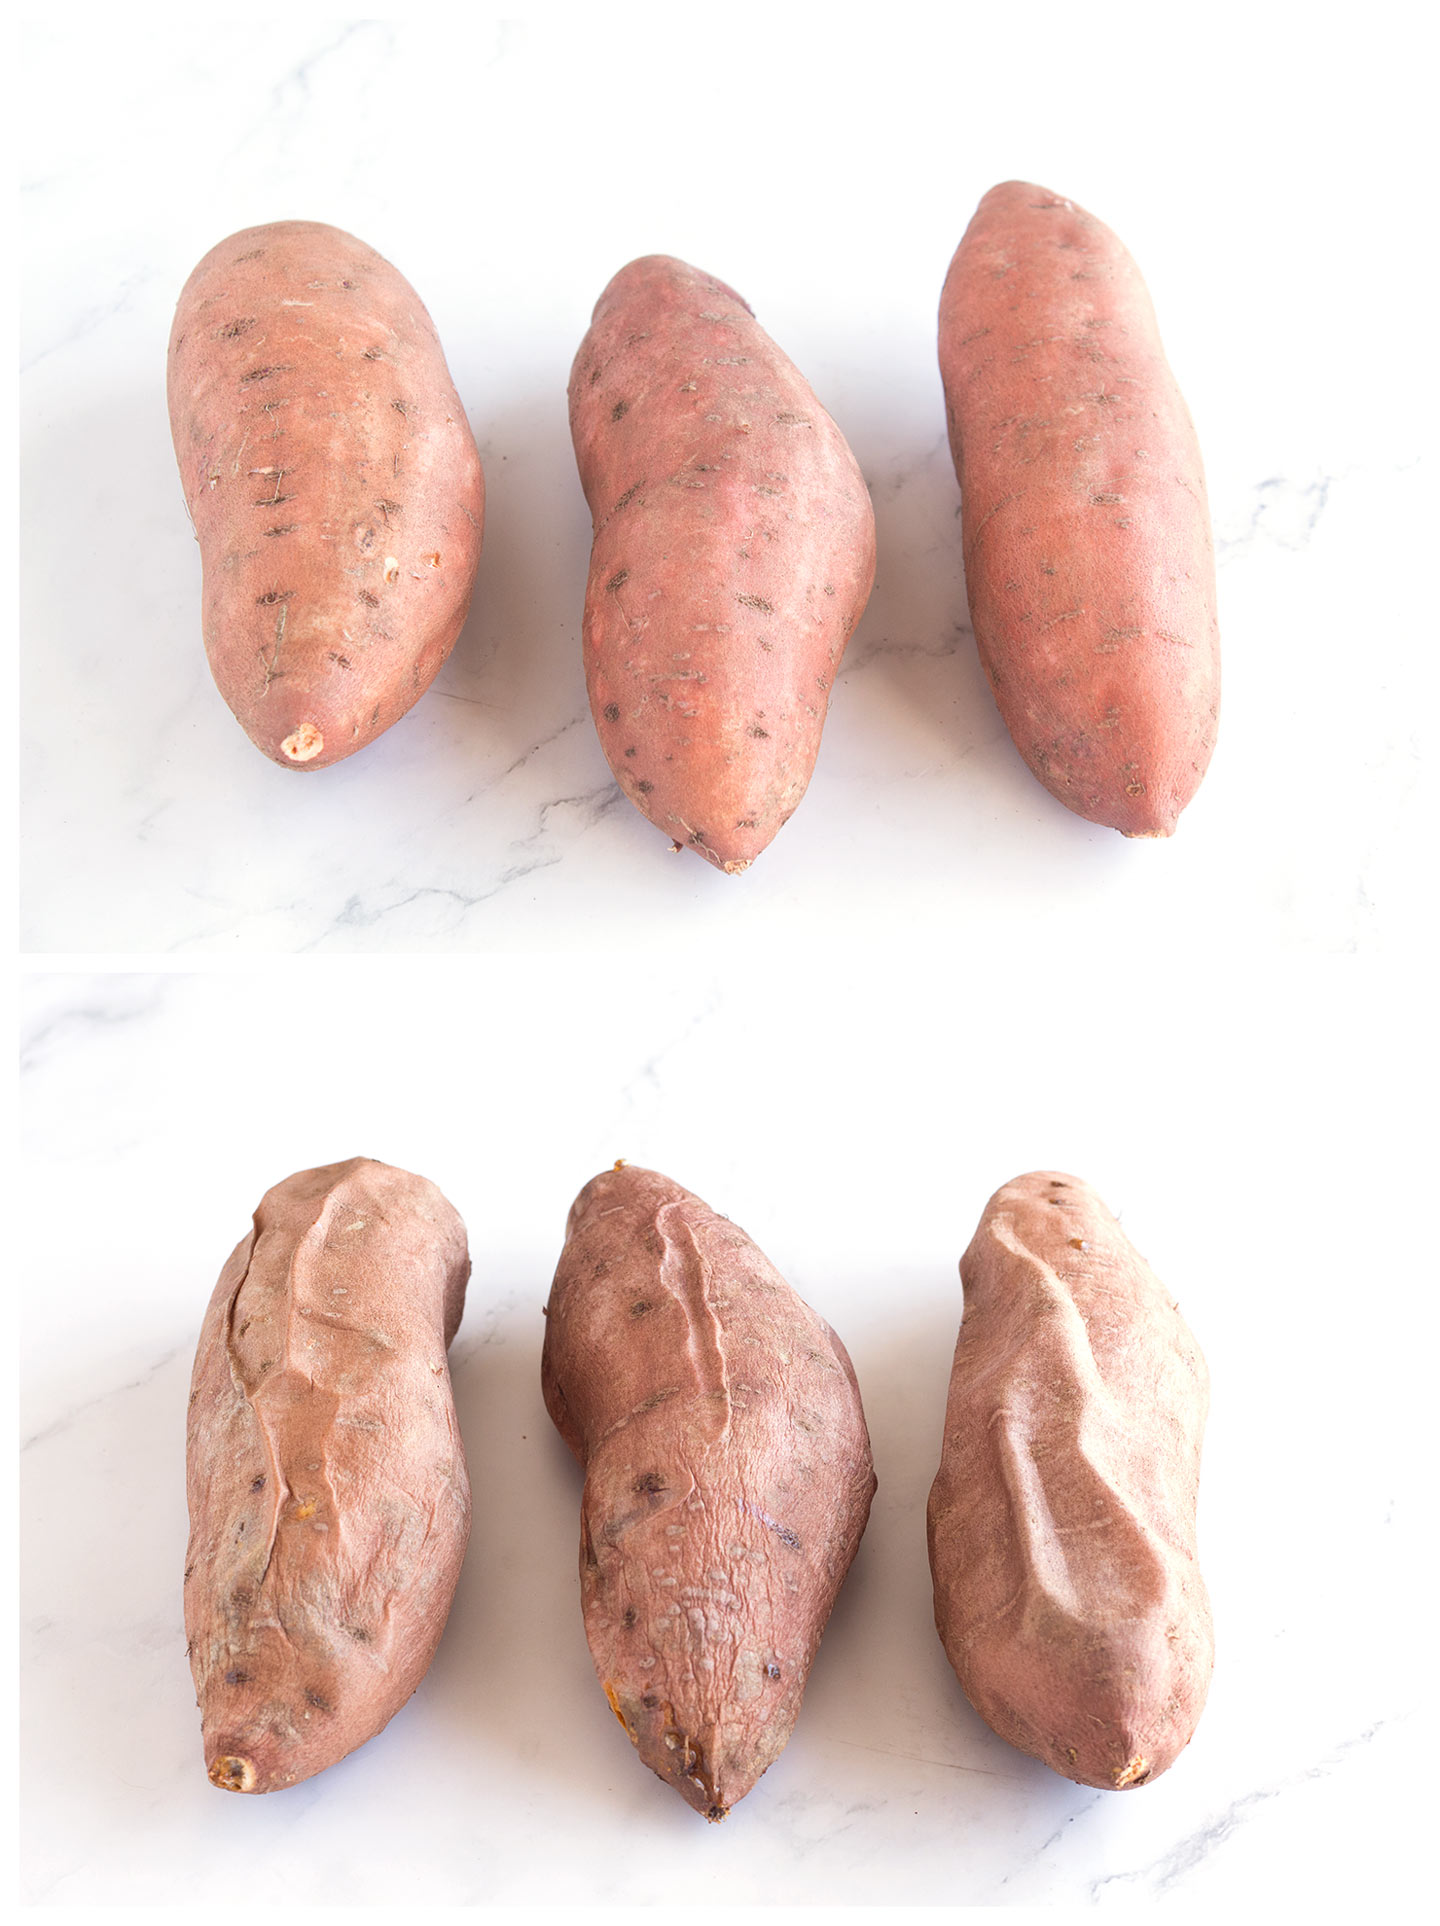 Raw sweet potatoes above baked sweet potatoes to compare.